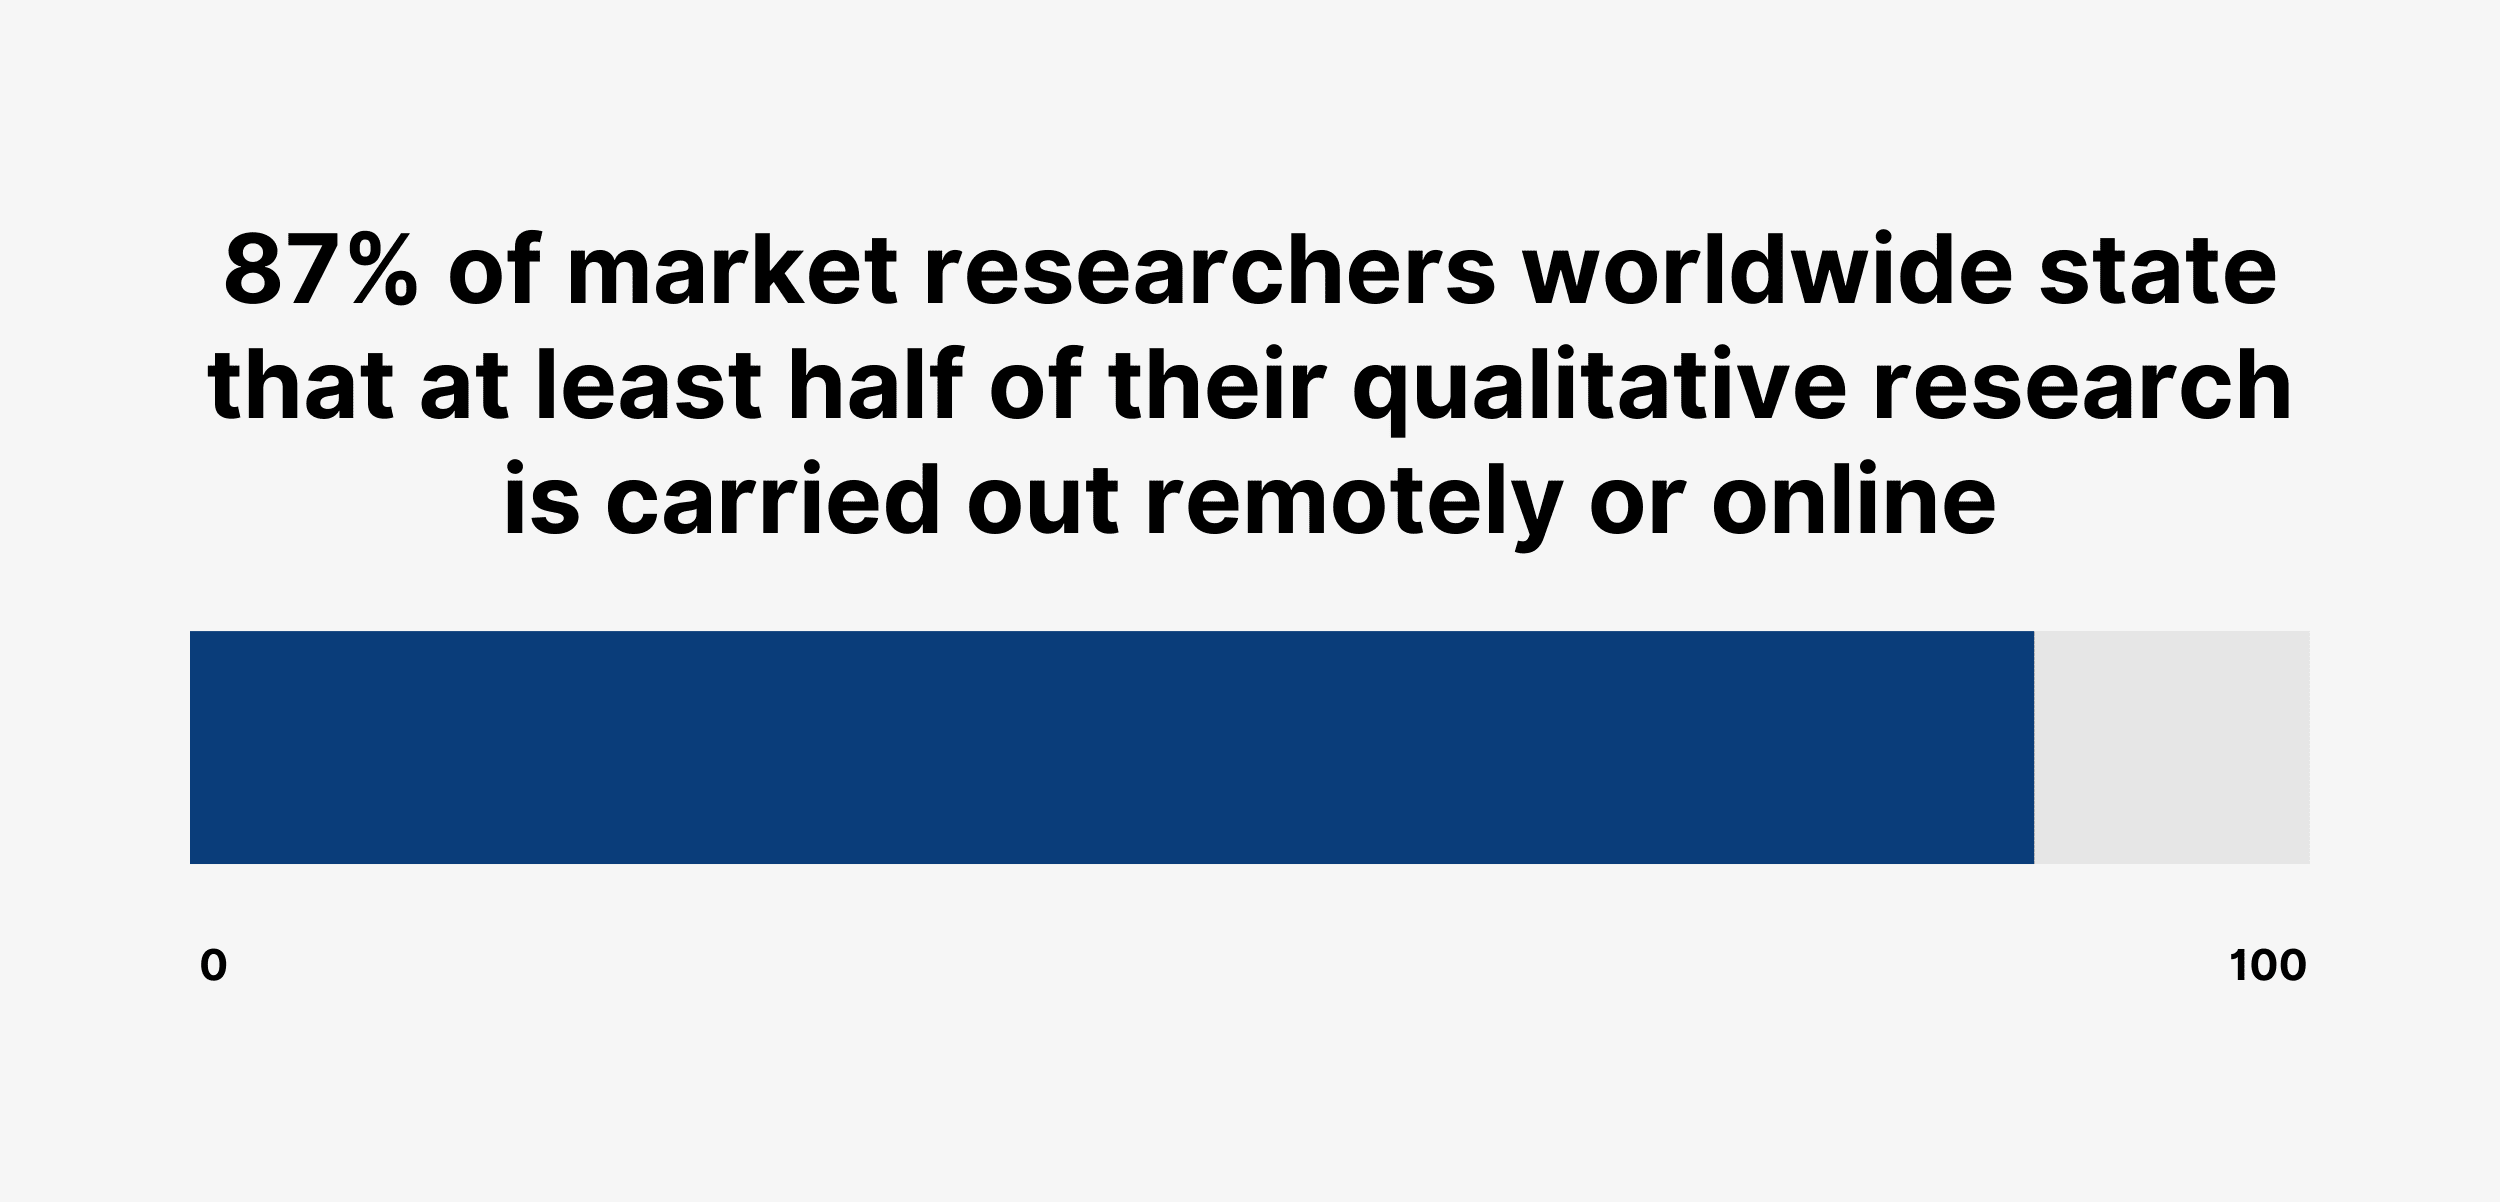 87% of market researchers worldwide state that at least half of their qualitative research is carried out remotely or online